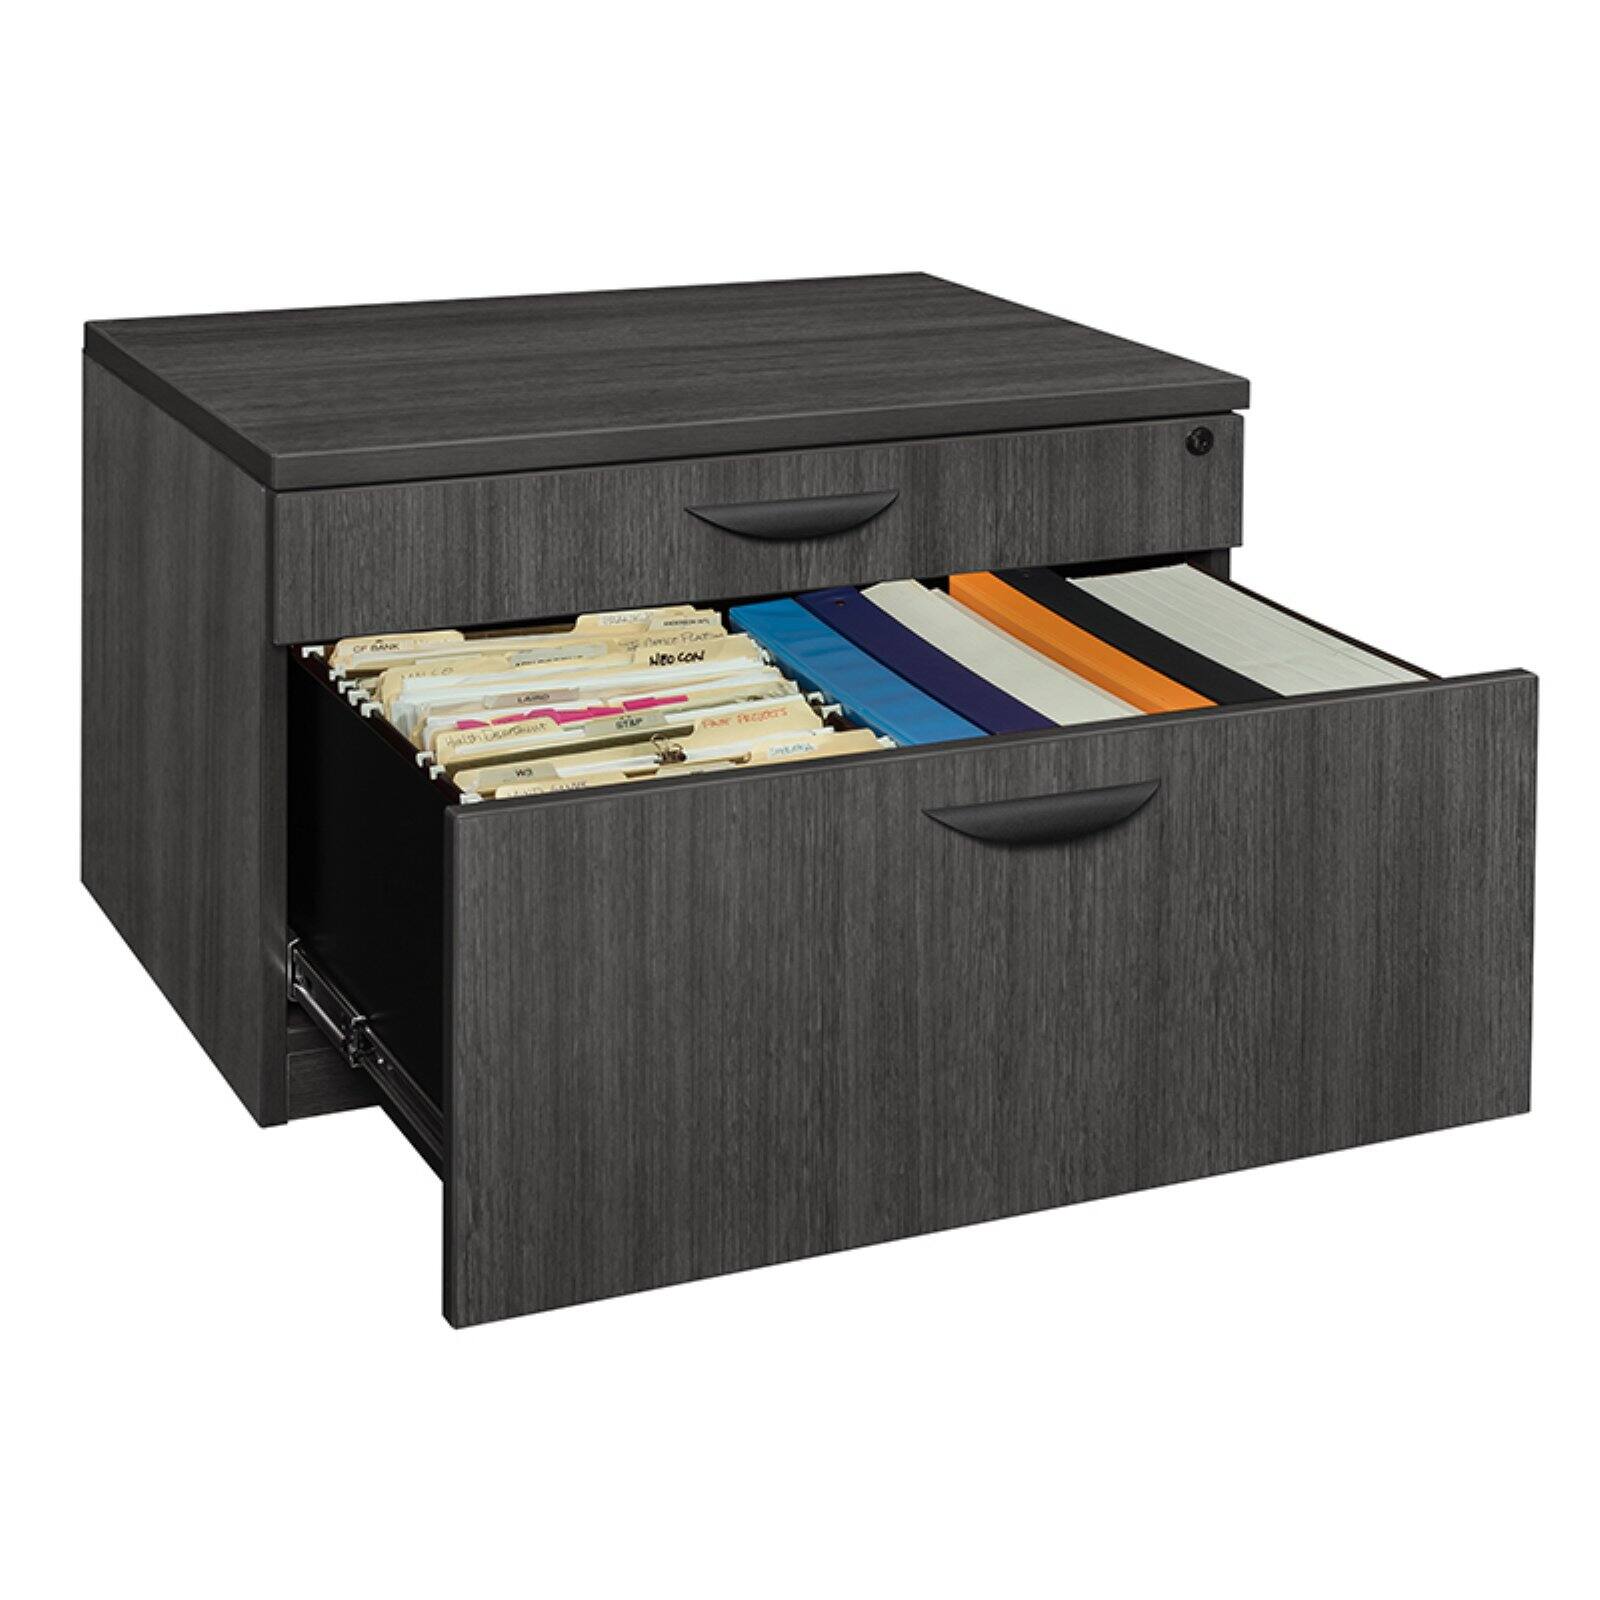 Regency Legacy 20 in. 2 Drawer Low Lateral File- Mahogany - image 4 of 7